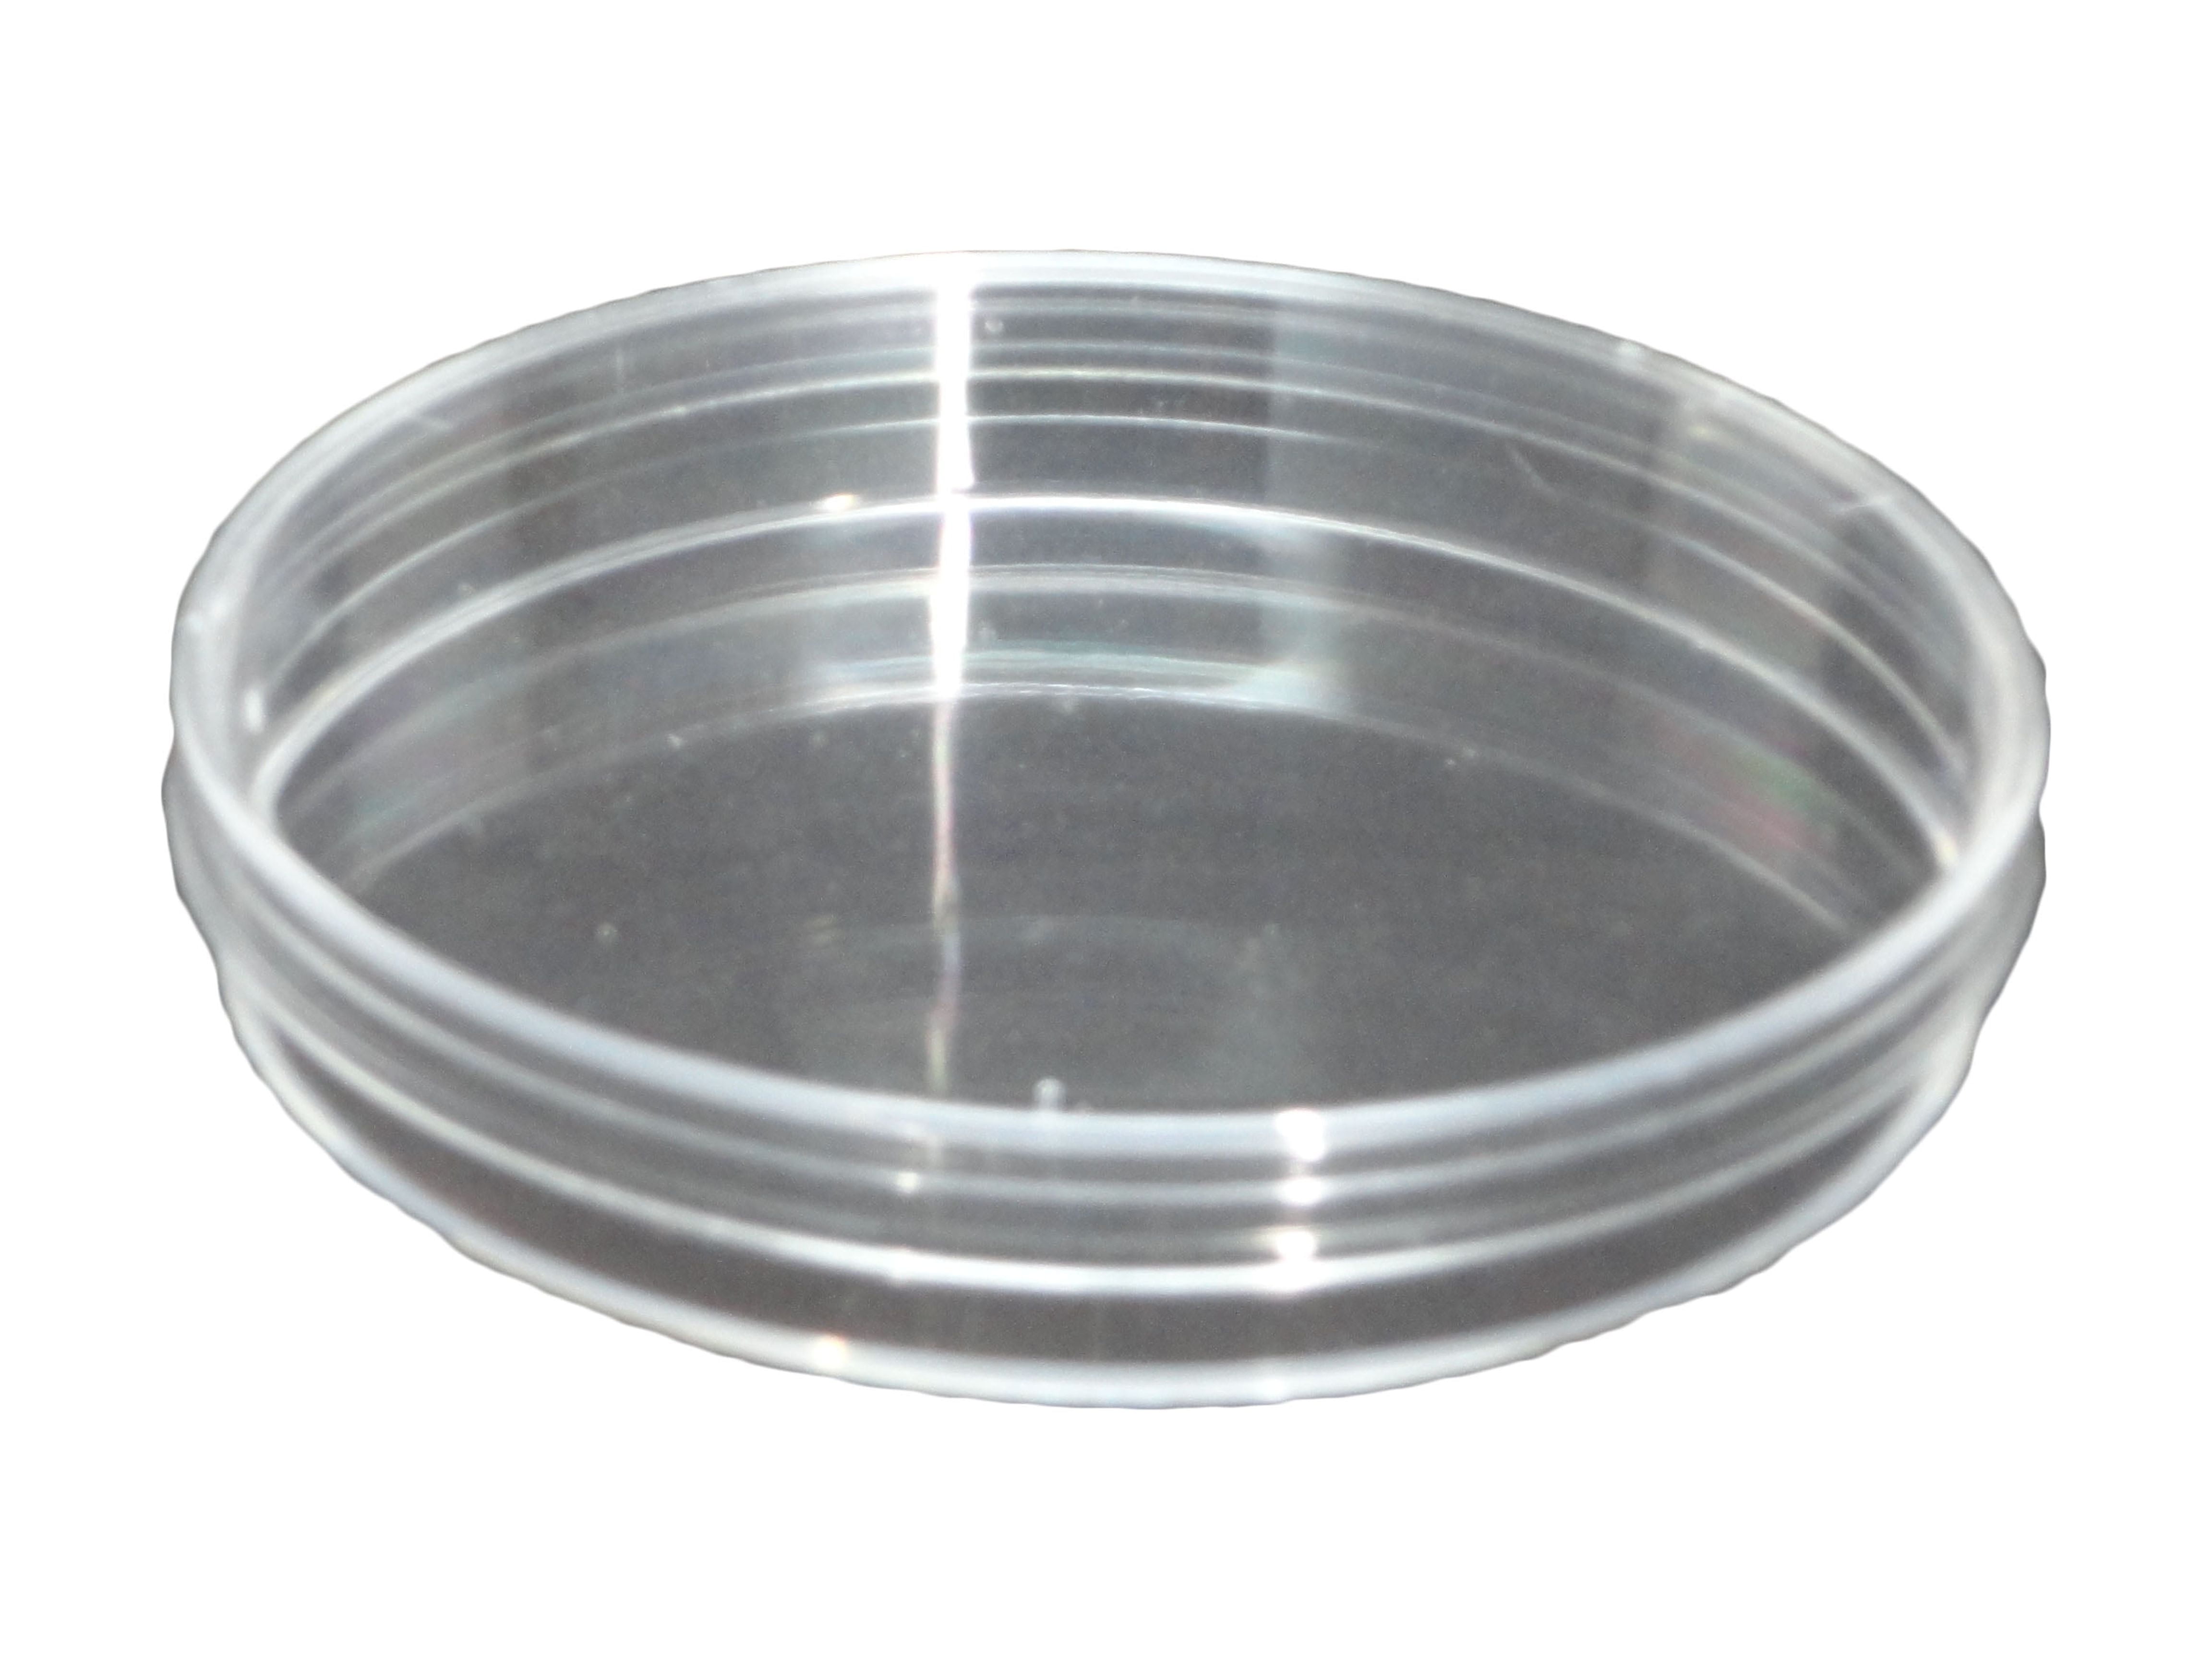 SOSW-10Pcs Sterile Petri Dishes w/Lids for Lab Plate Bacterial